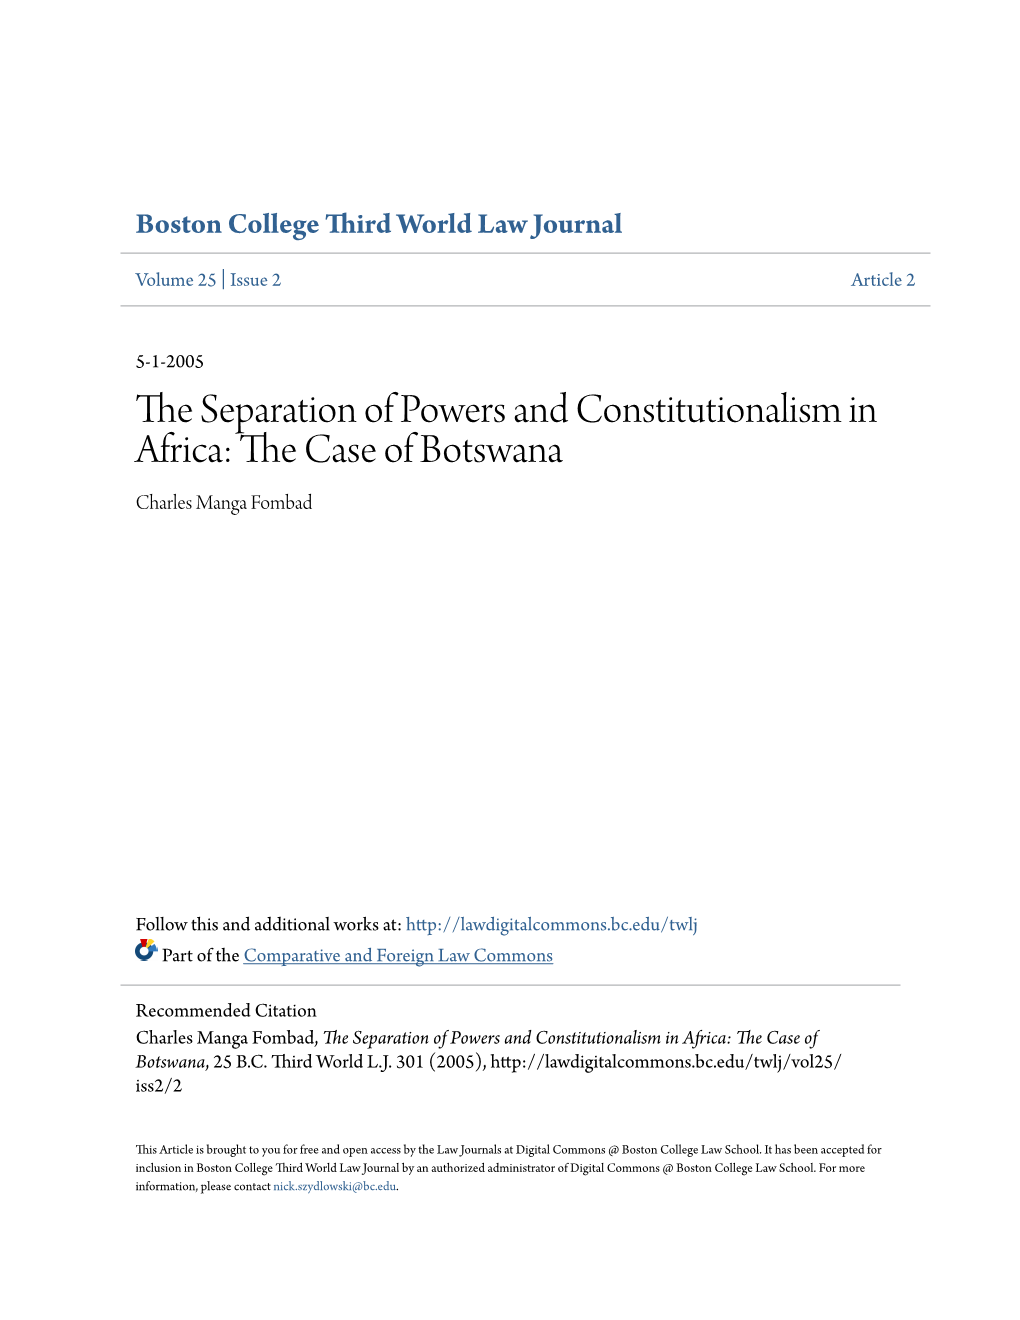 The Separation of Powers and Constitutionalism in Africa: the Case of Botswana, 25 B.C